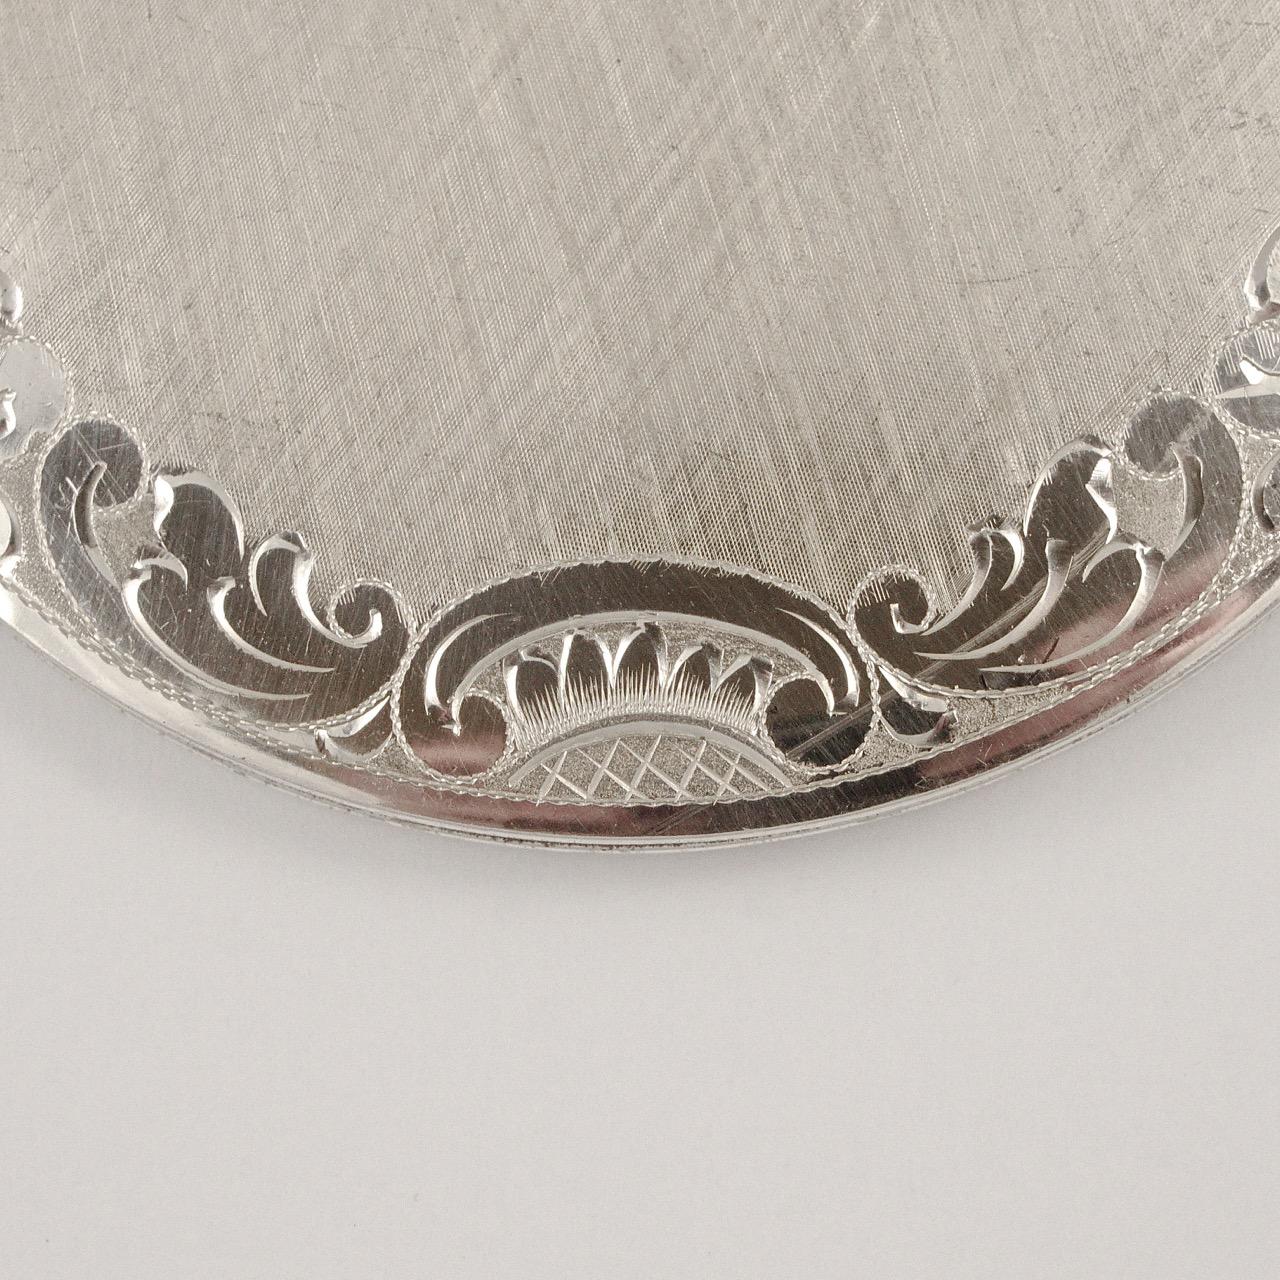 West Germany heavy sterling silver powder compact, featuring a textured and shiny hand engraved stylised leaf and scroll design. The back is ridged.  Measuring diameter 9.3cm / 3.66 inches. Inside there is a bevel edged mirror with engine turned